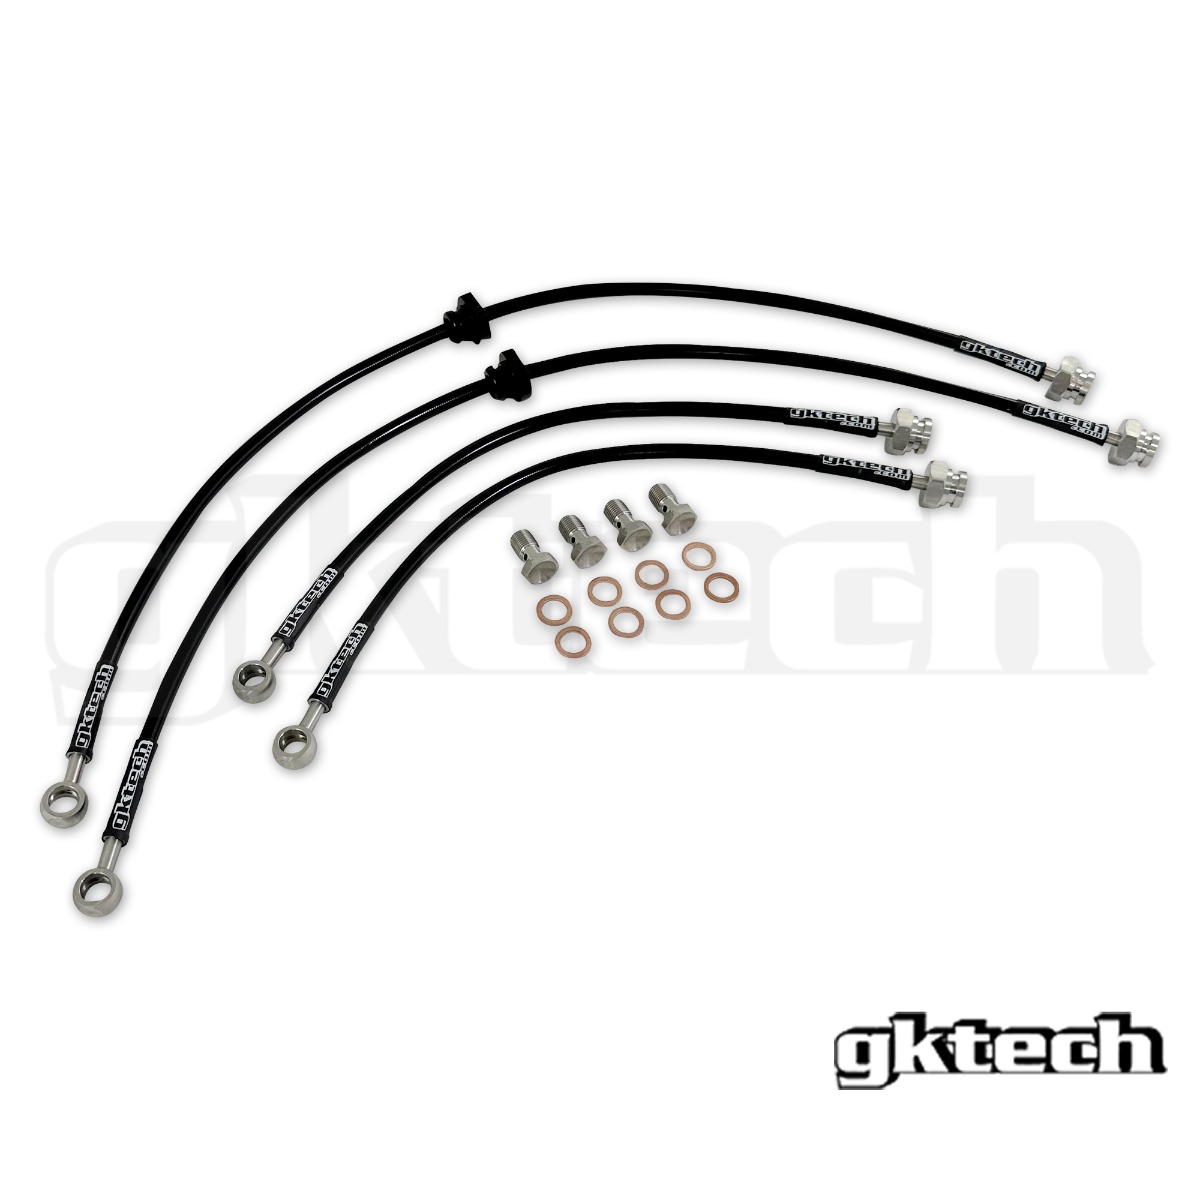 GK Tech Braided Brake Lines Set (Front & Rear)  Nissan 240sx S14 / Silvia  S15 » iRace Auto Sports